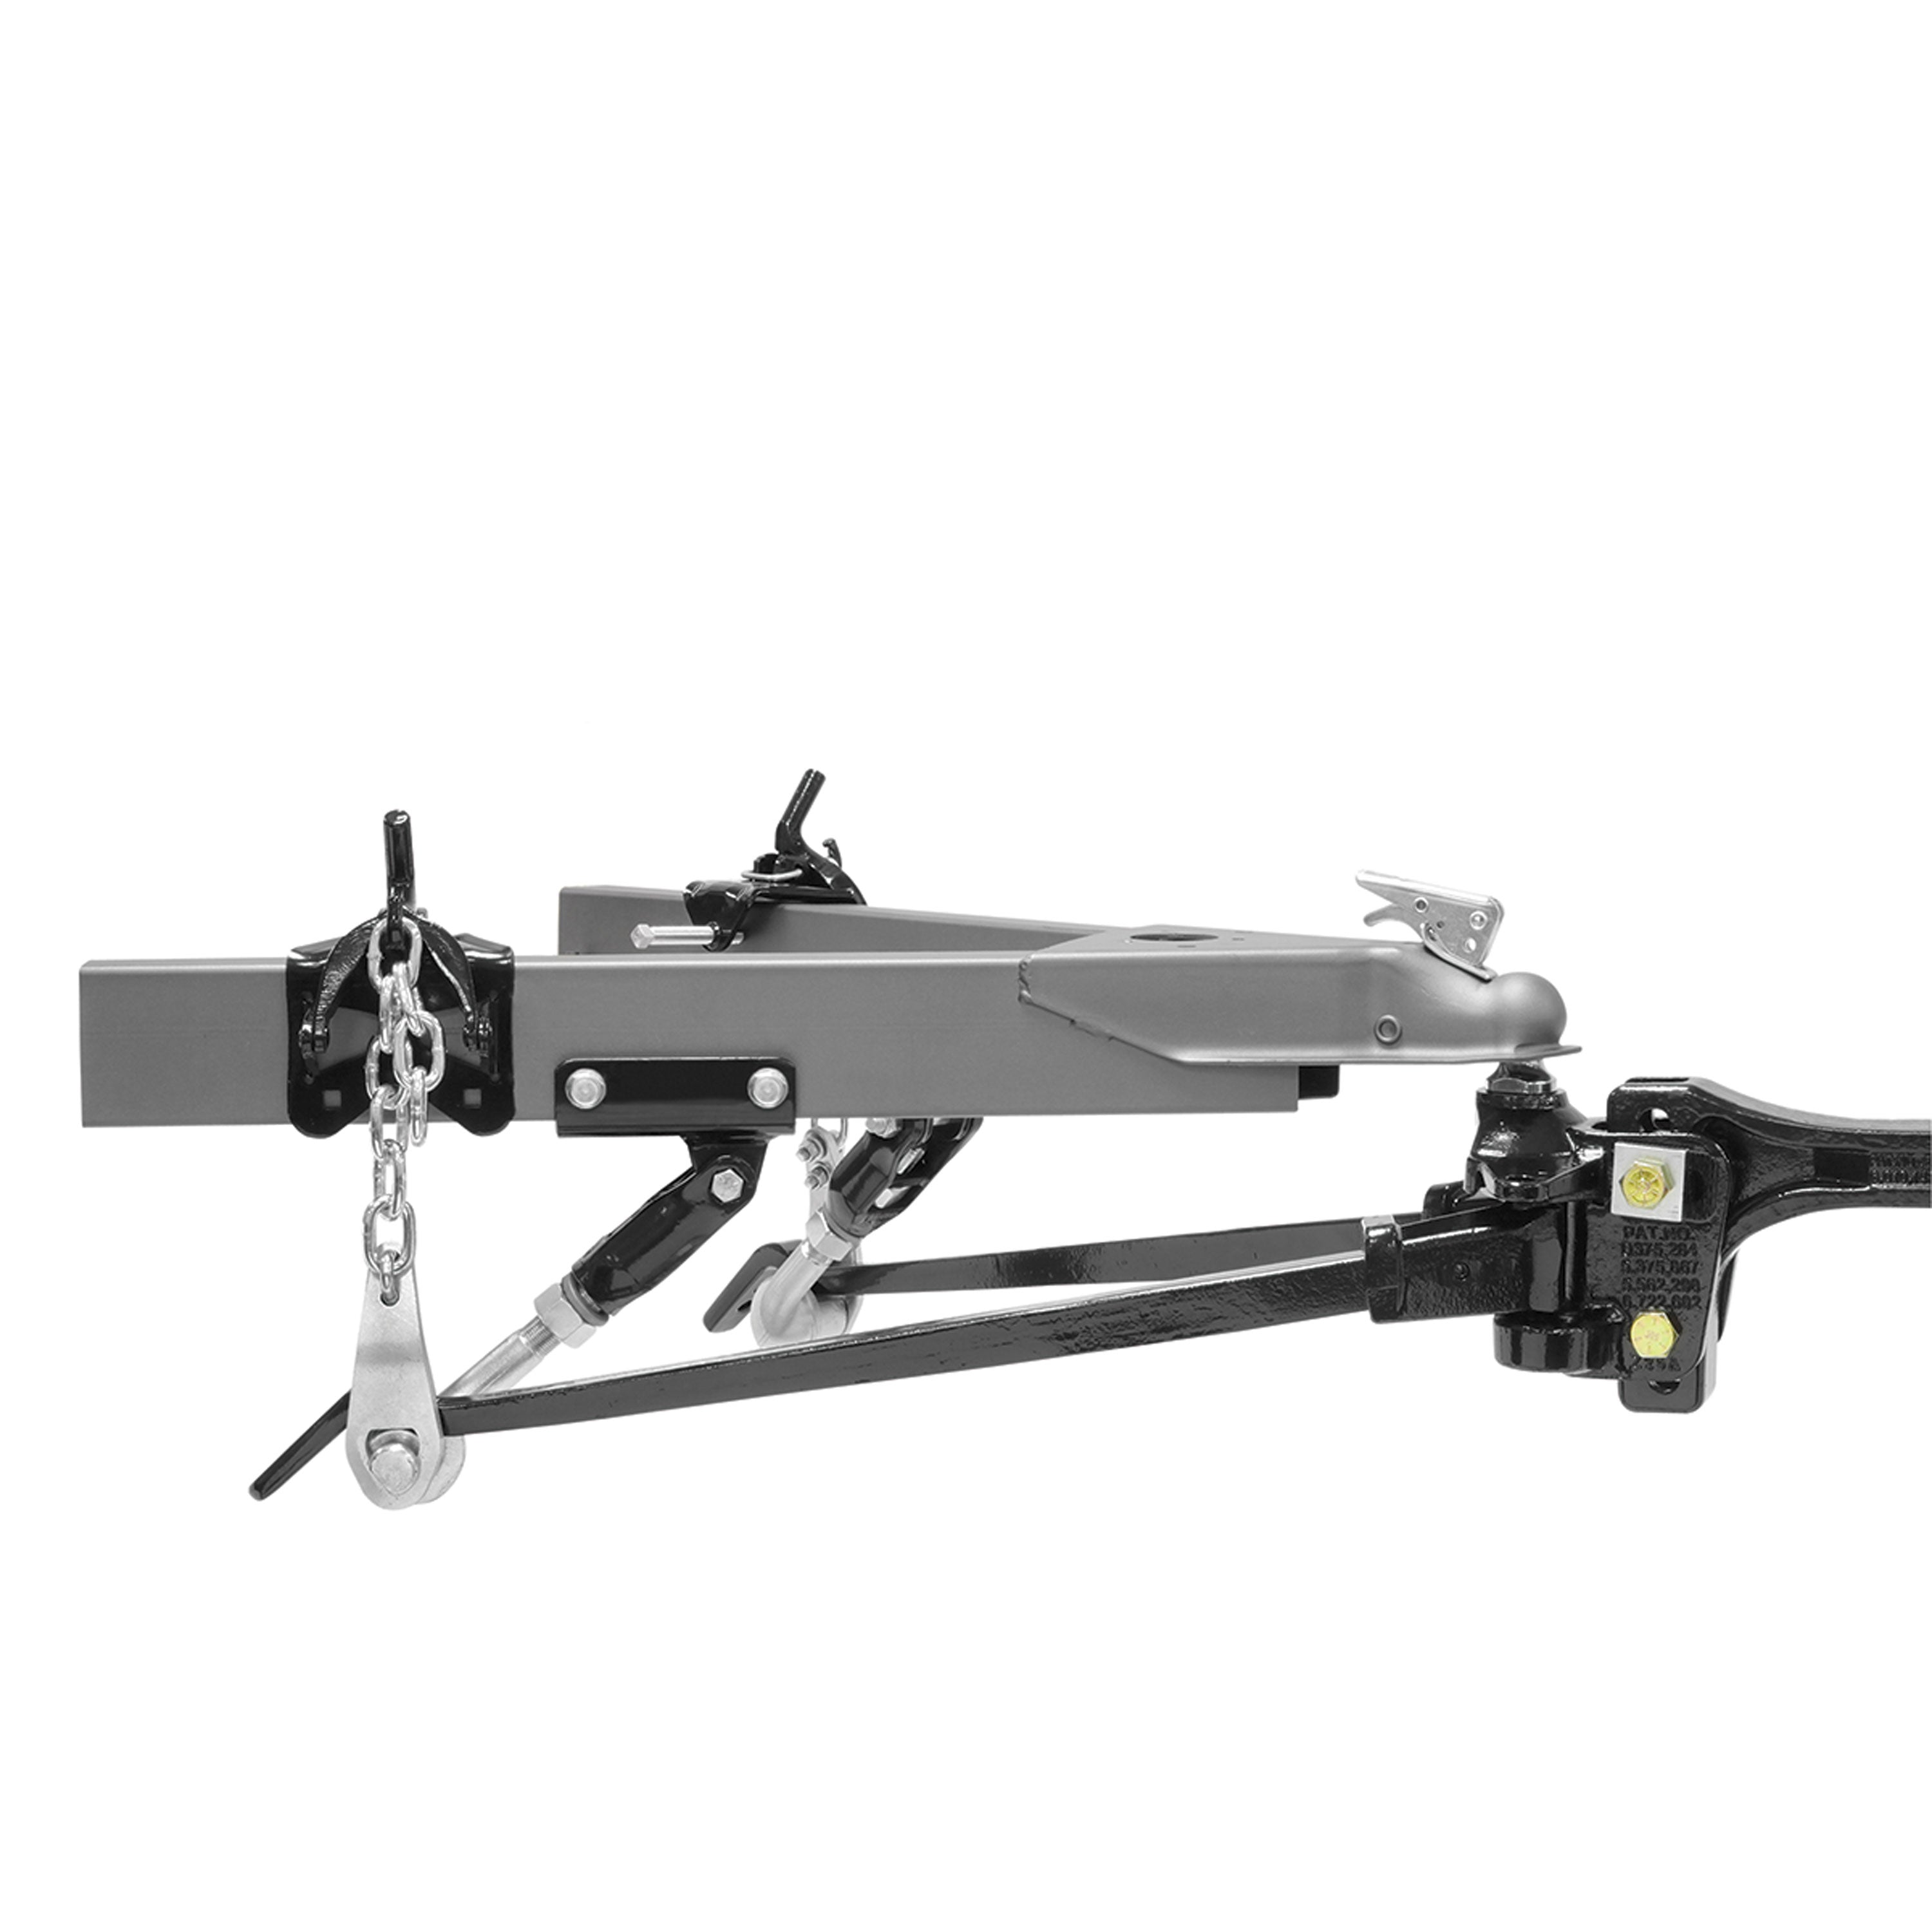 Reese 66075 Wd Hi Perf 1700# Titan with Hitch